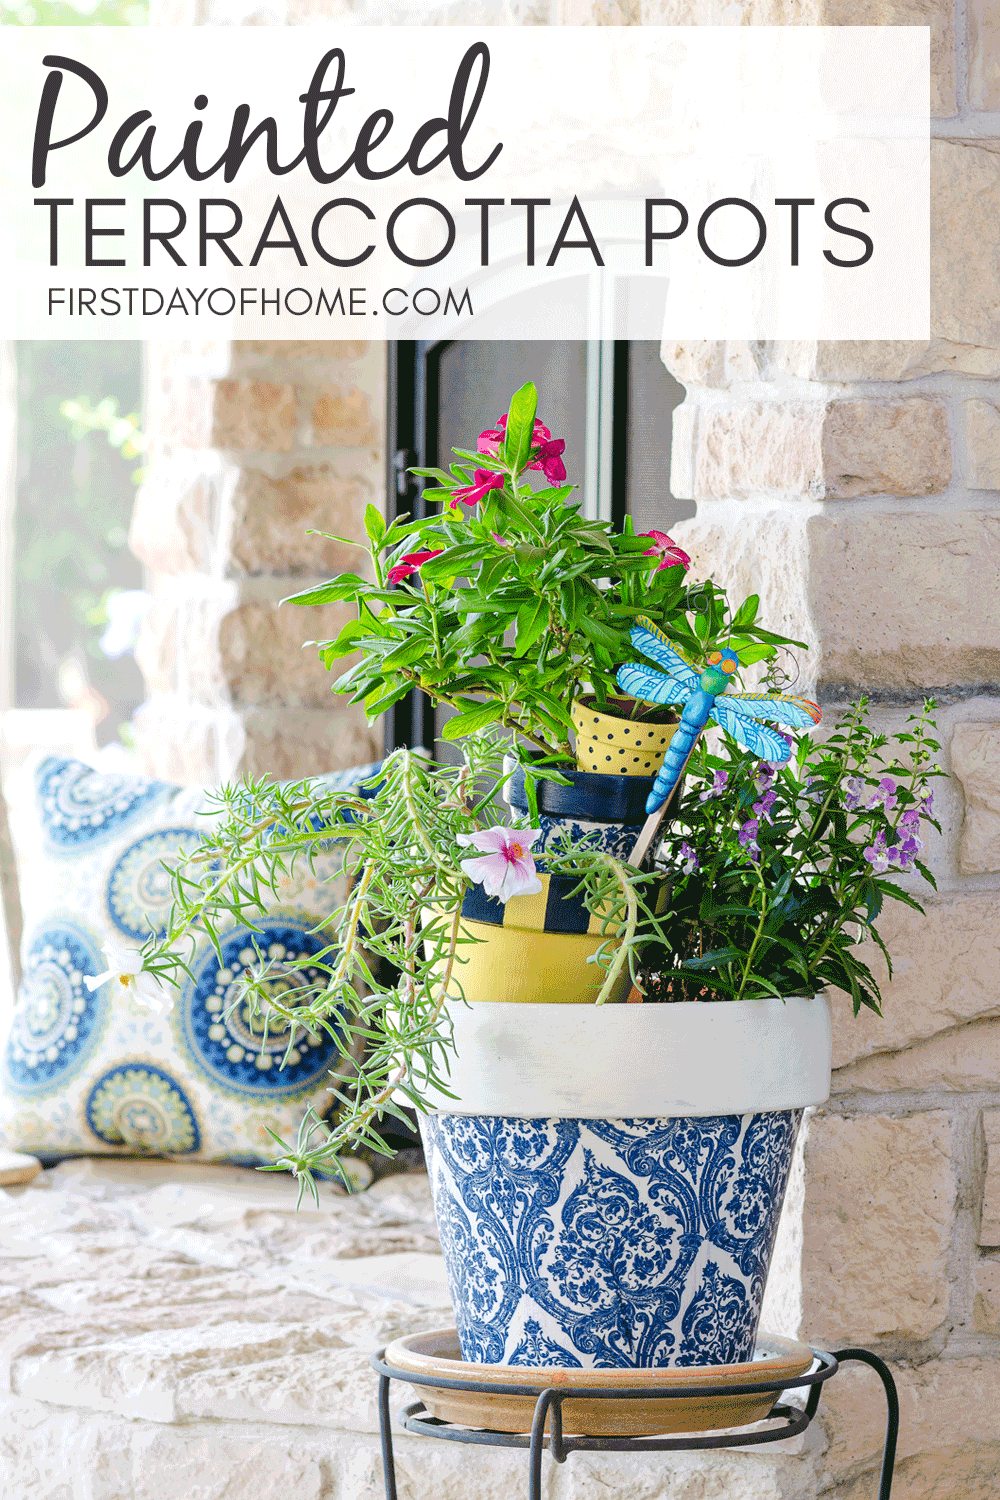 Painting Terracotta Pots Like The Pros, How To Paint Outdoor Pots